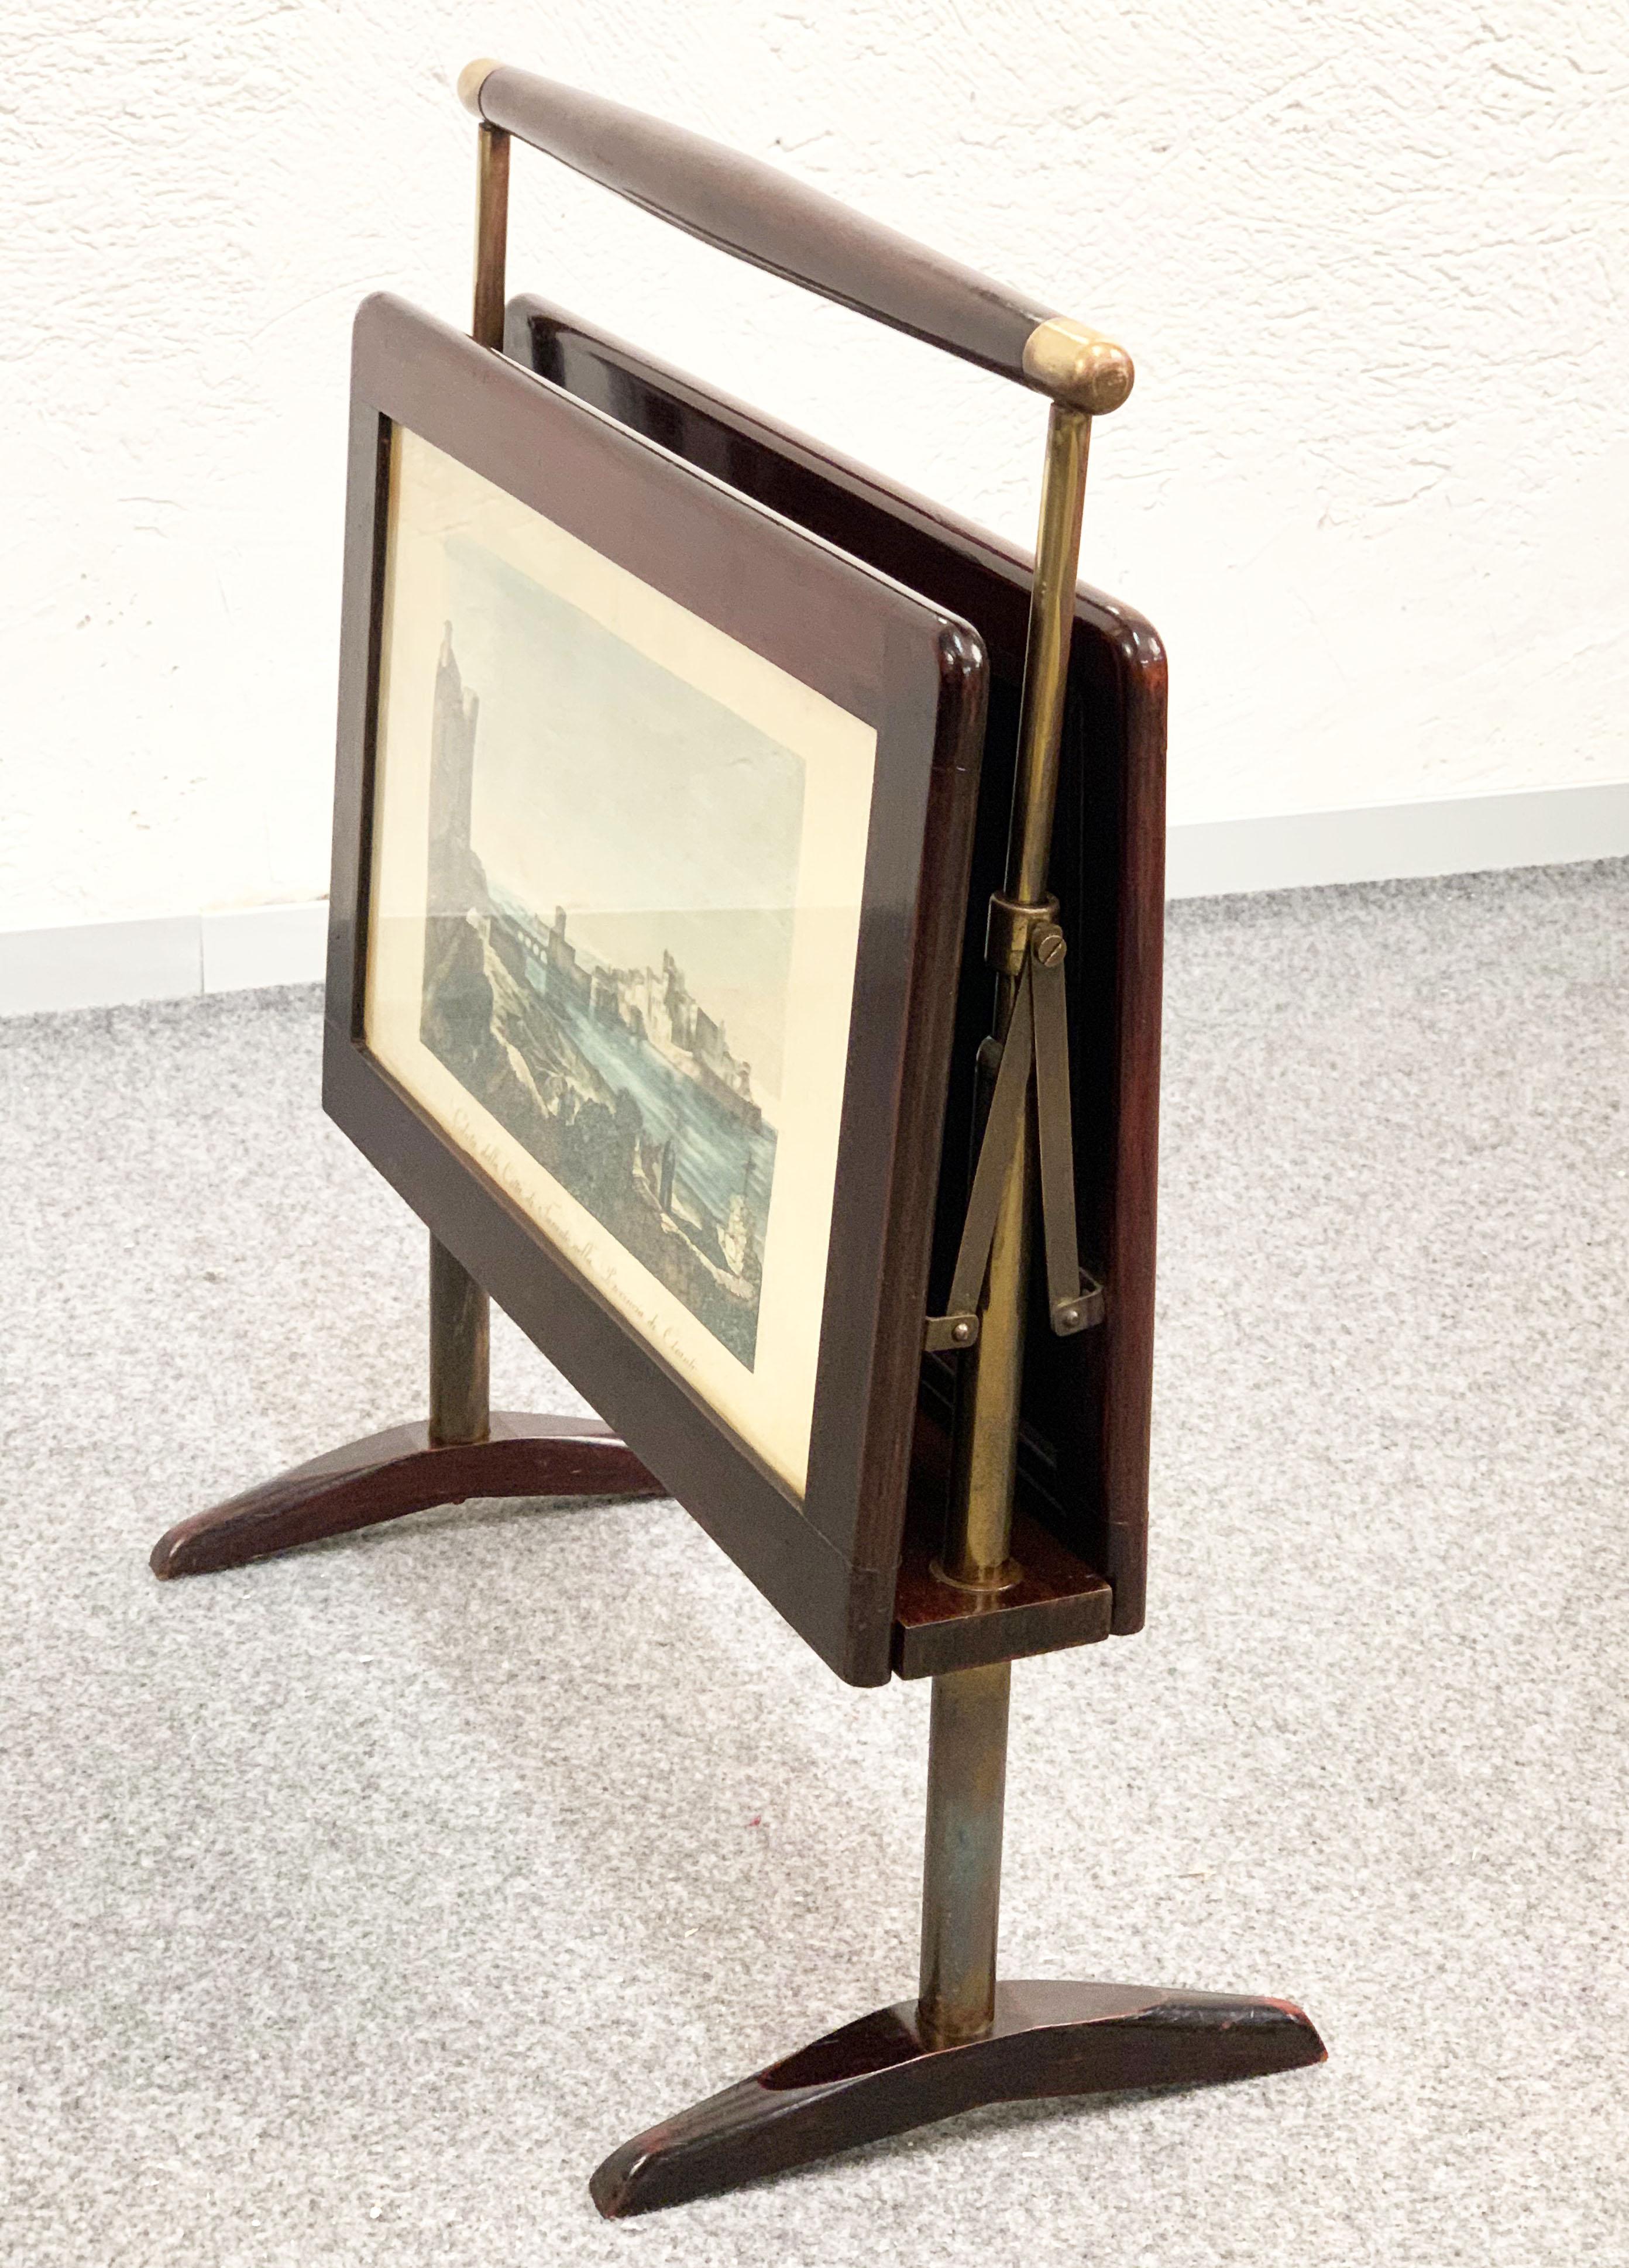 Midcentury Wood and Brass Italian Magazine Rack in Ico Parisi Style, 1950s For Sale 3